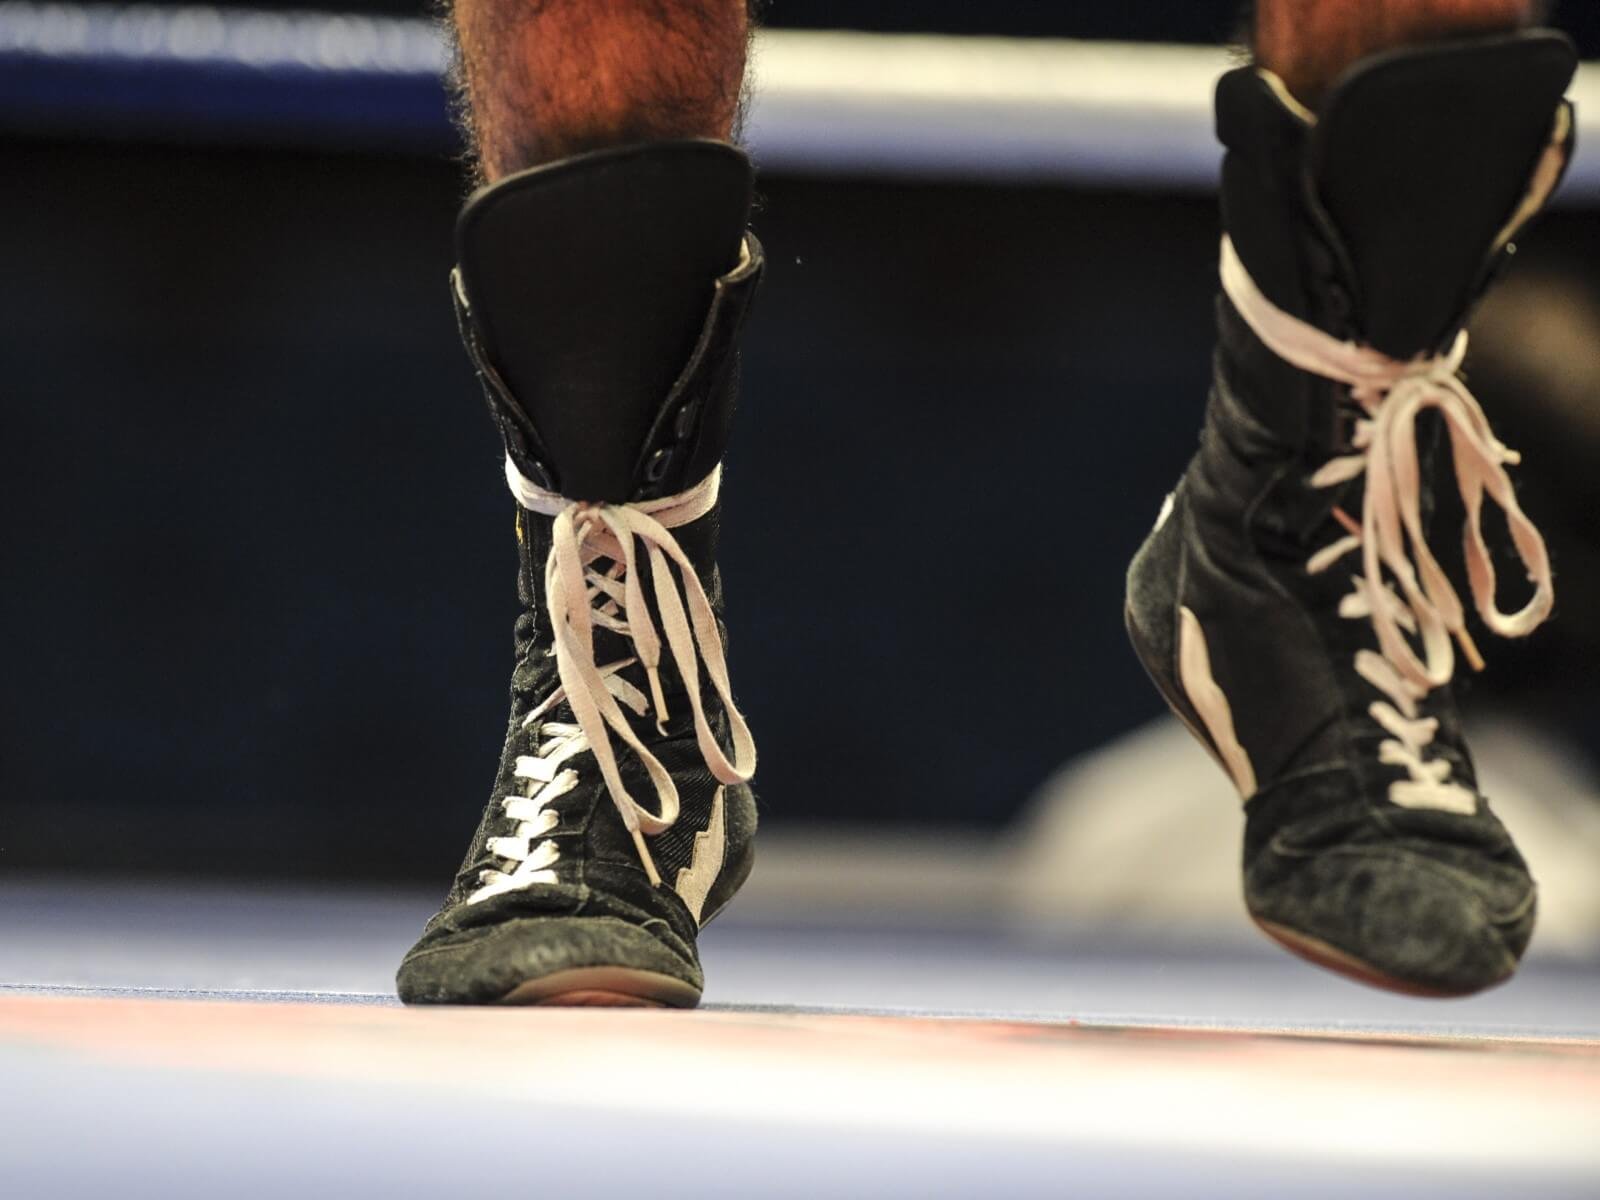 Wrestlers Boots